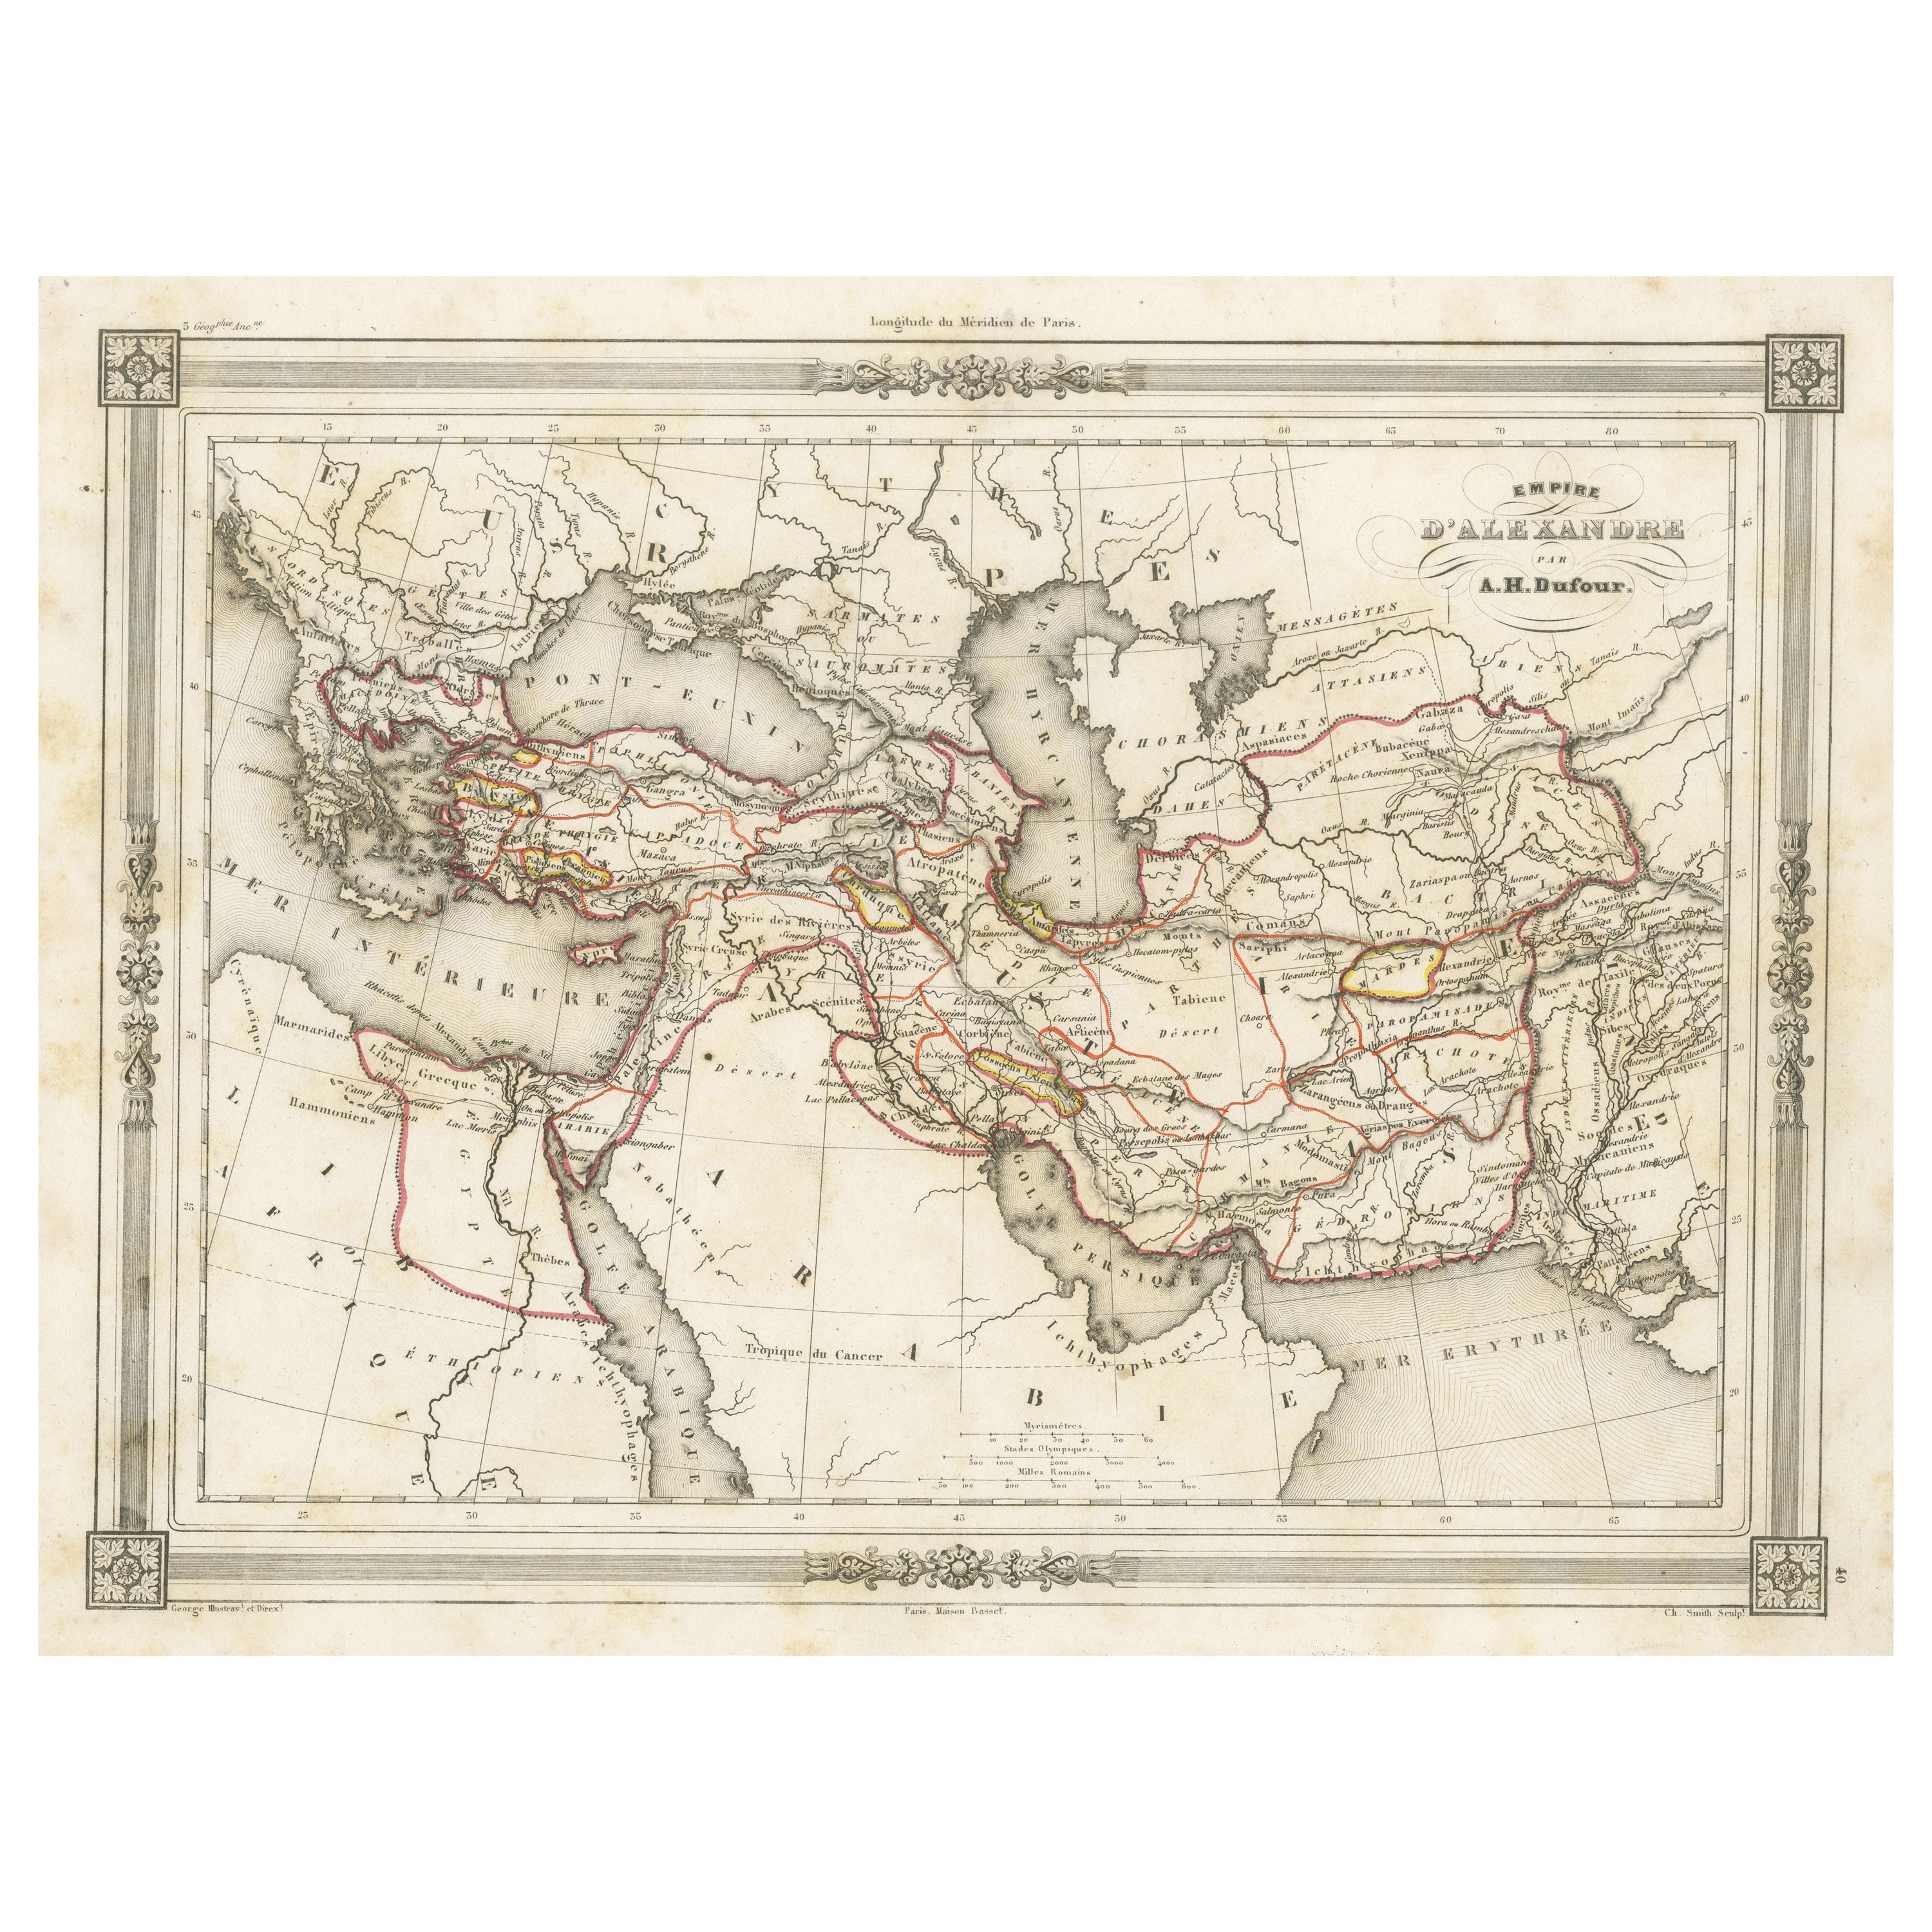 Antique Map of the Empire of Alexander the Great, with Frame Style Border